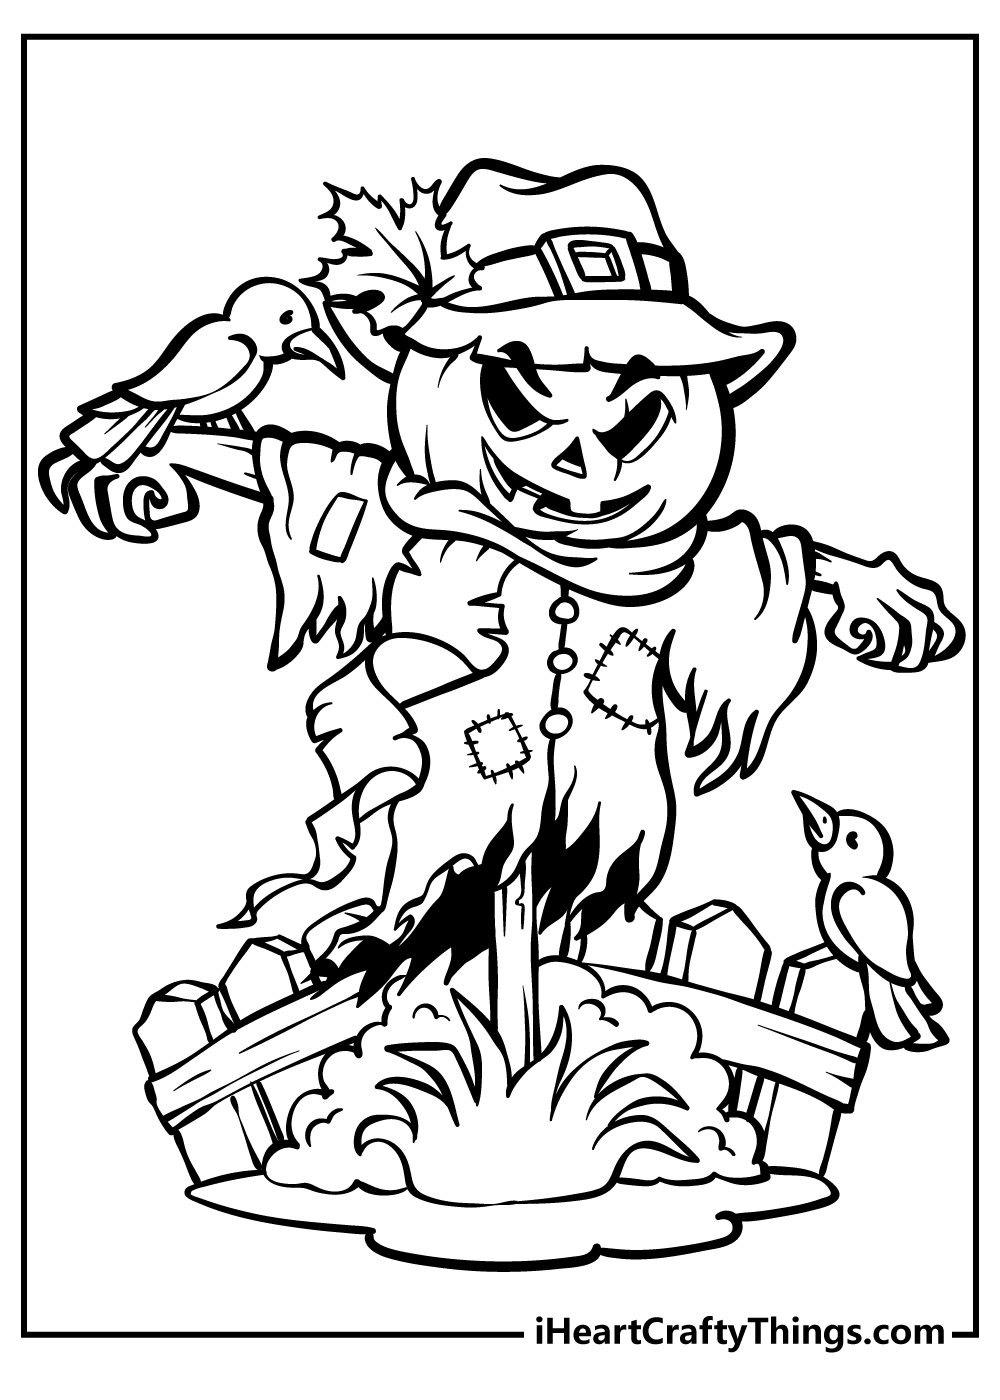 Halloween coloring pages free printables